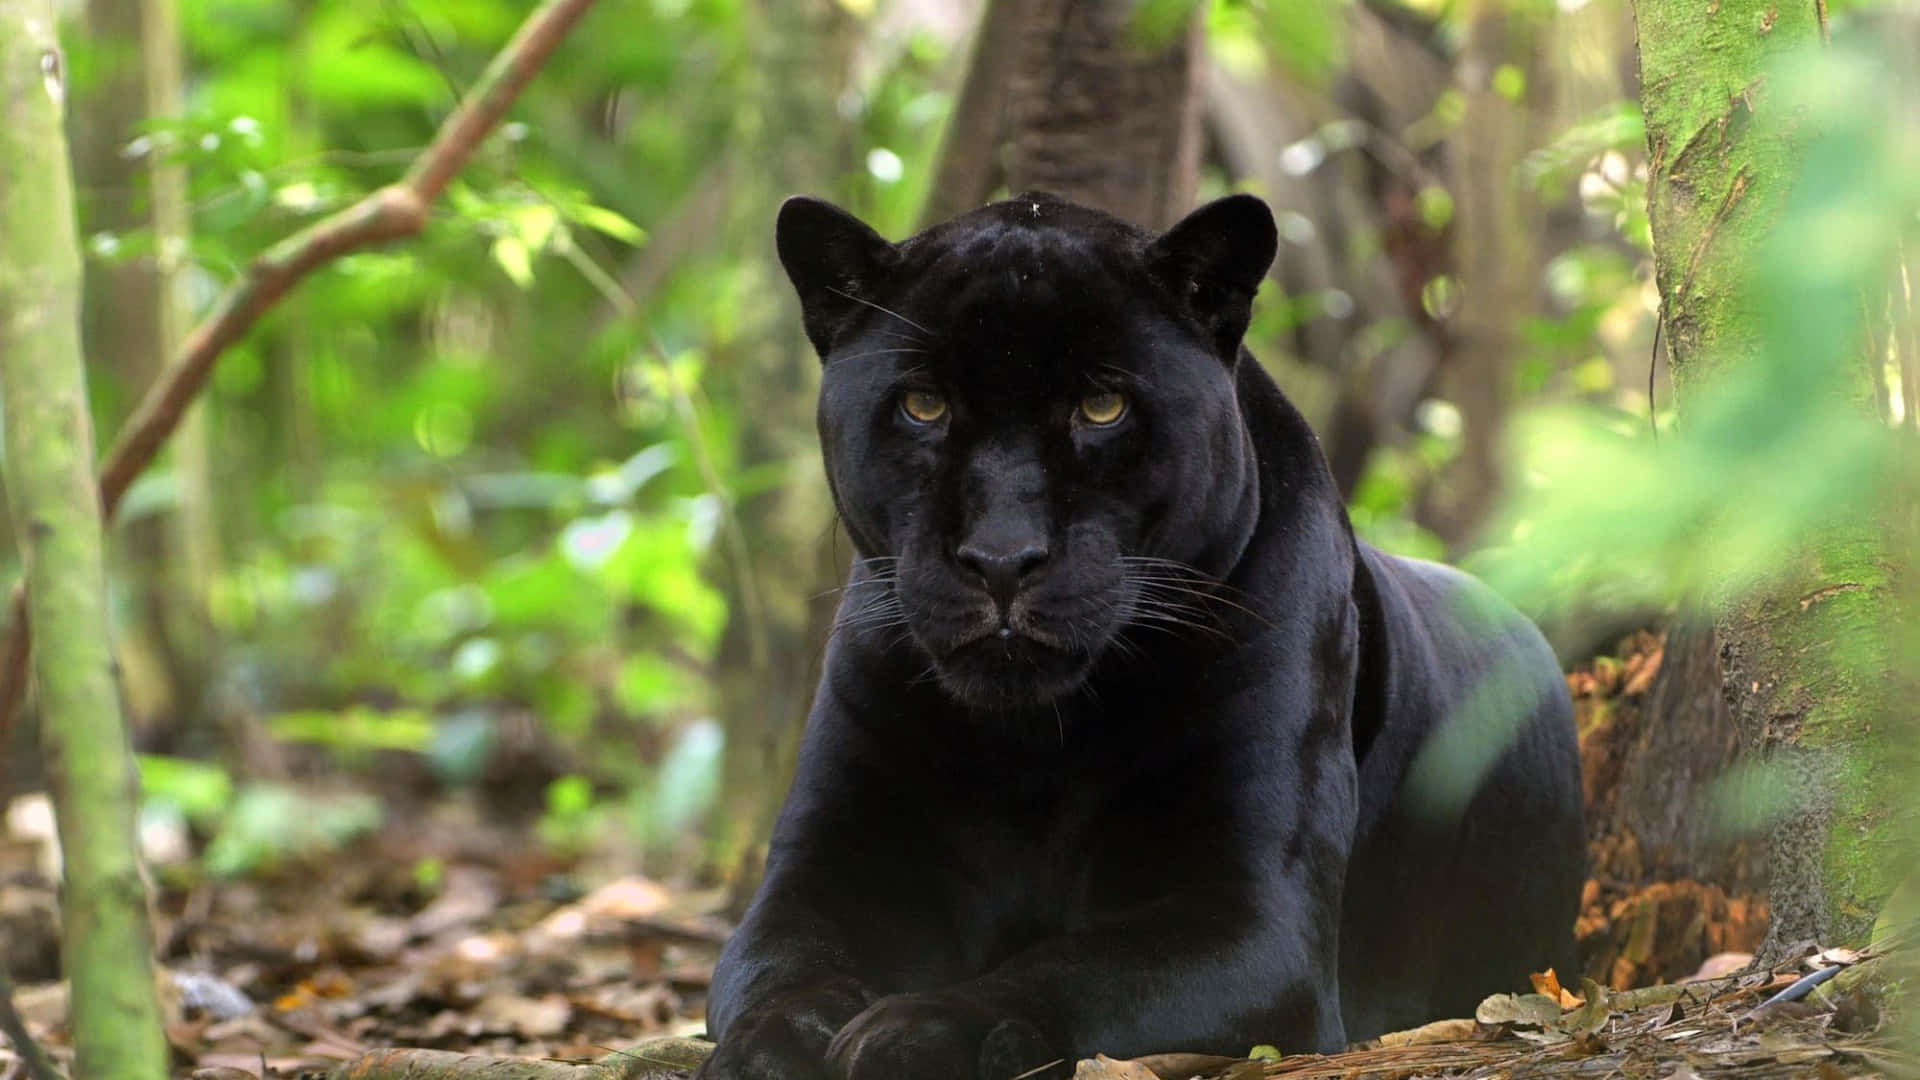 A Black Panther Is Sitting In The Forest Wallpaper